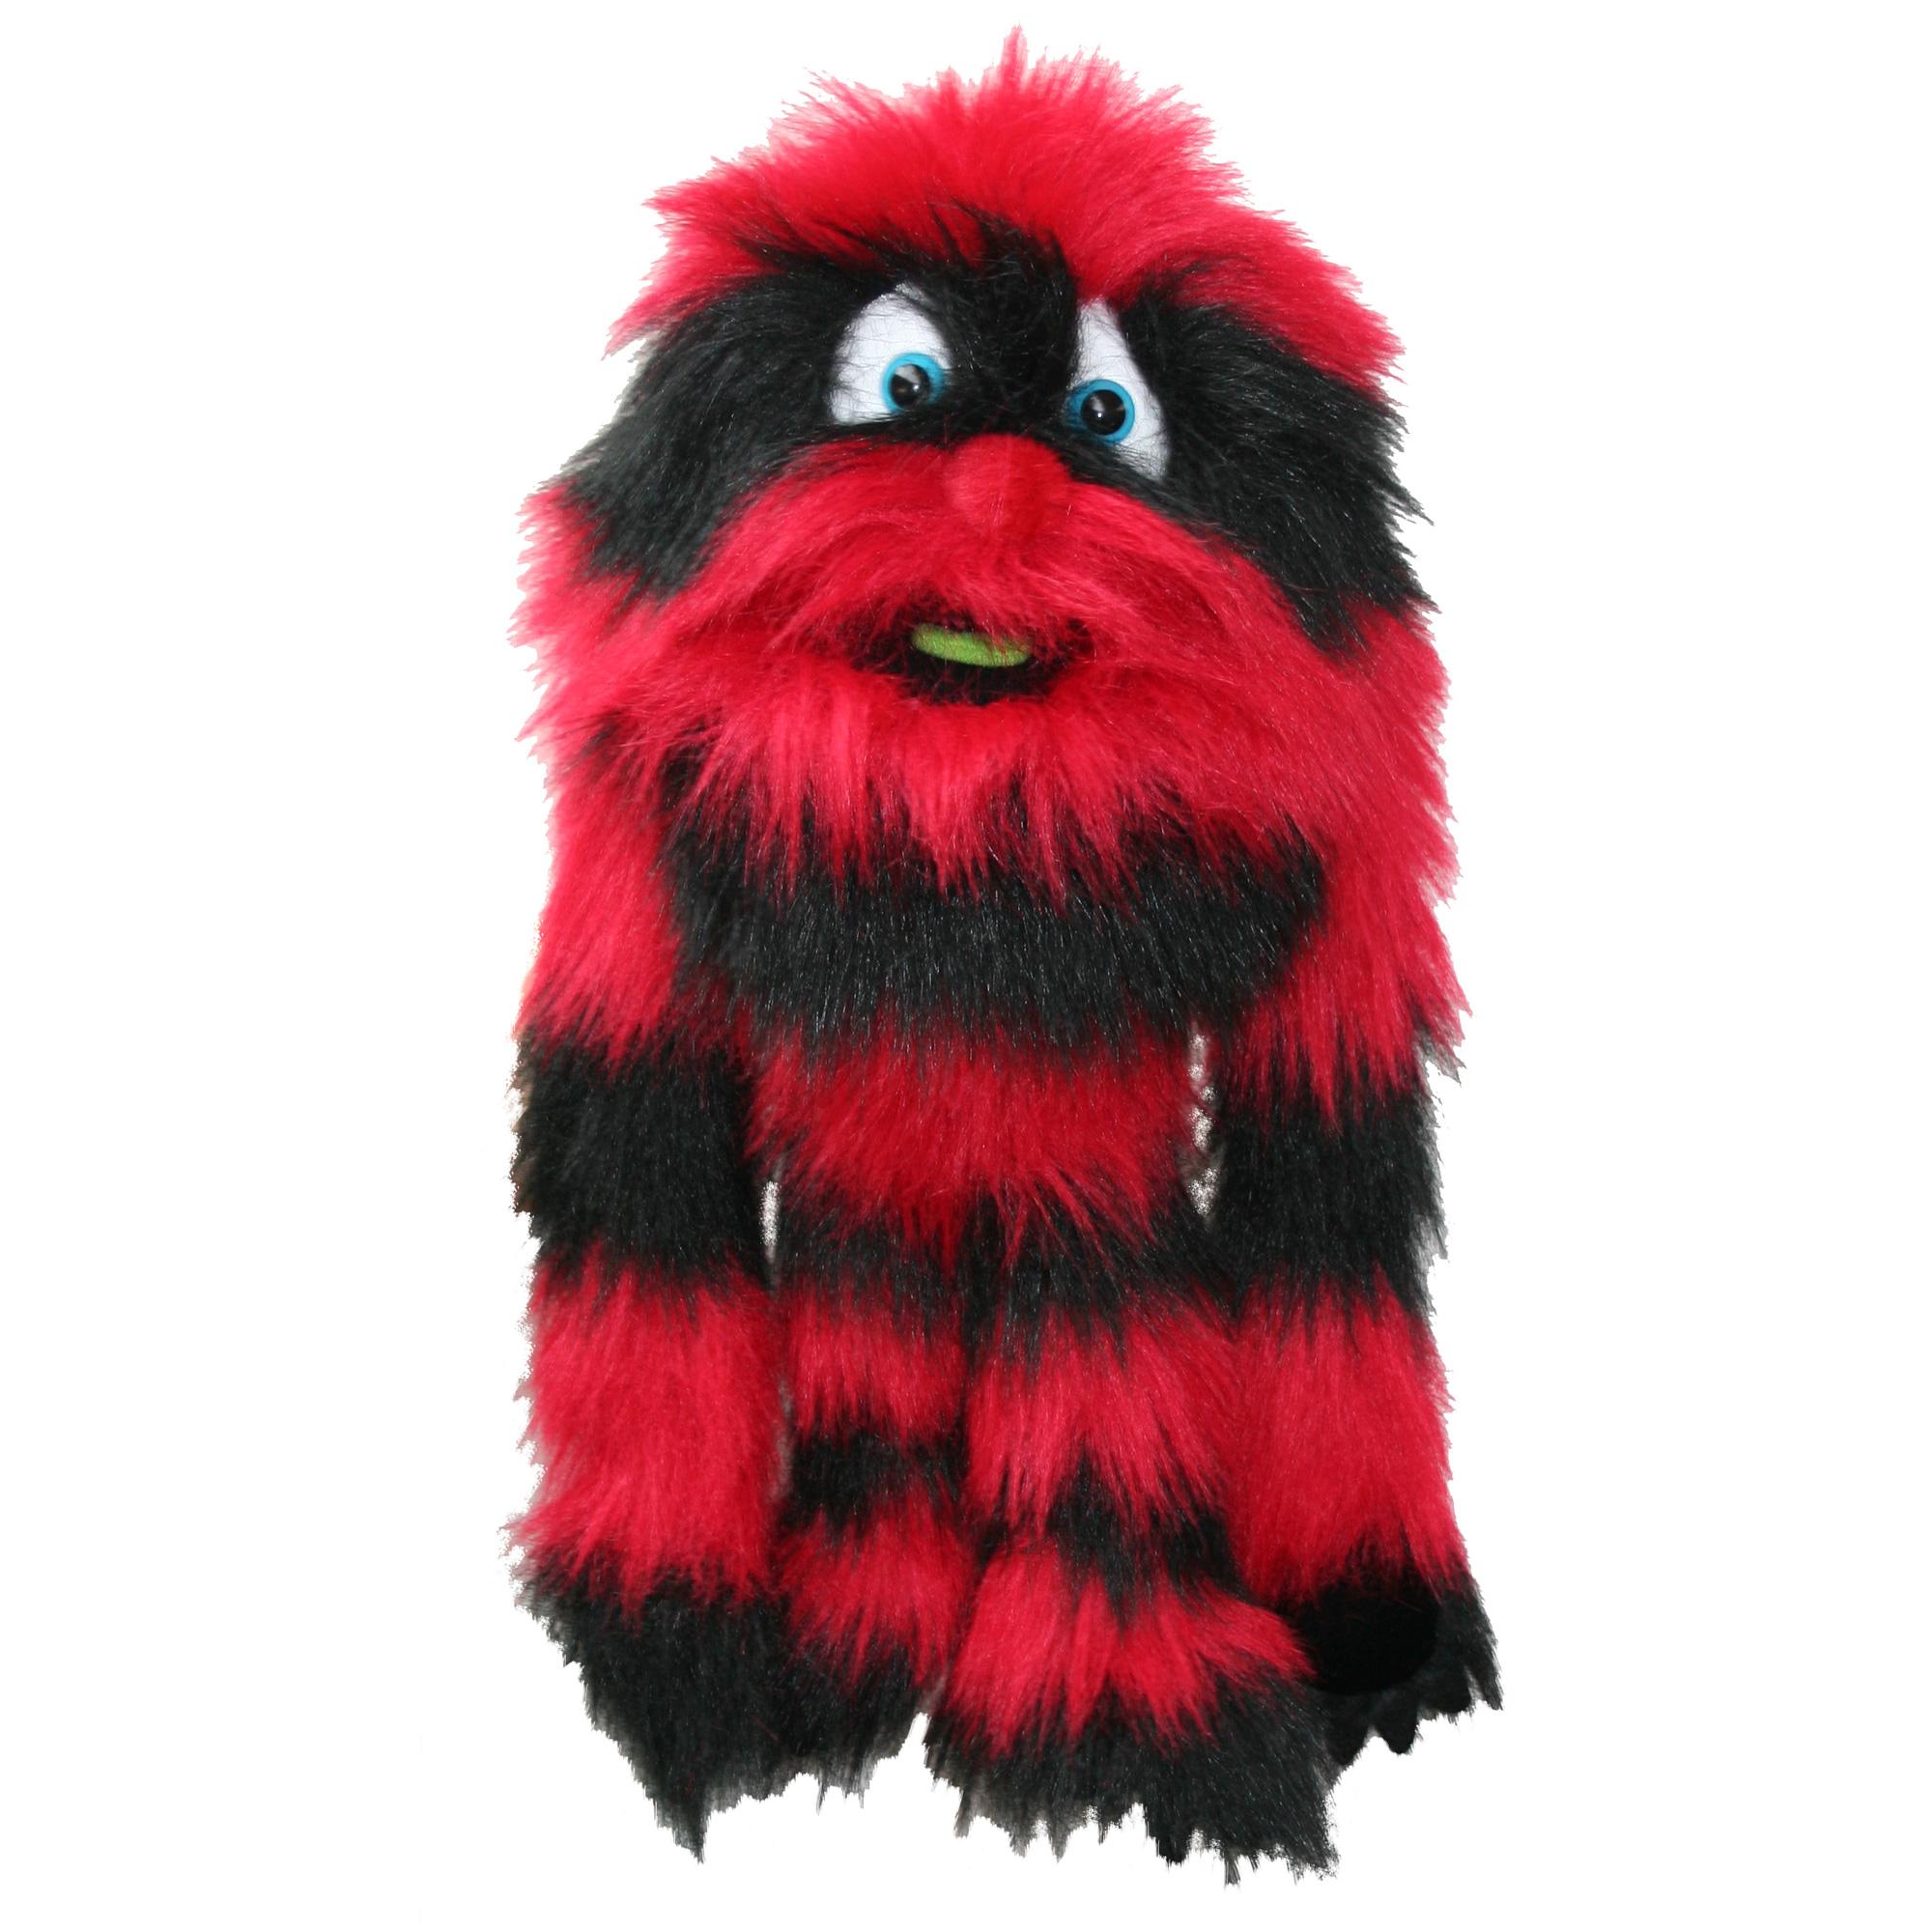 Red And Black Monster Puppet - £18.00 - Hamleys for Toys and Games